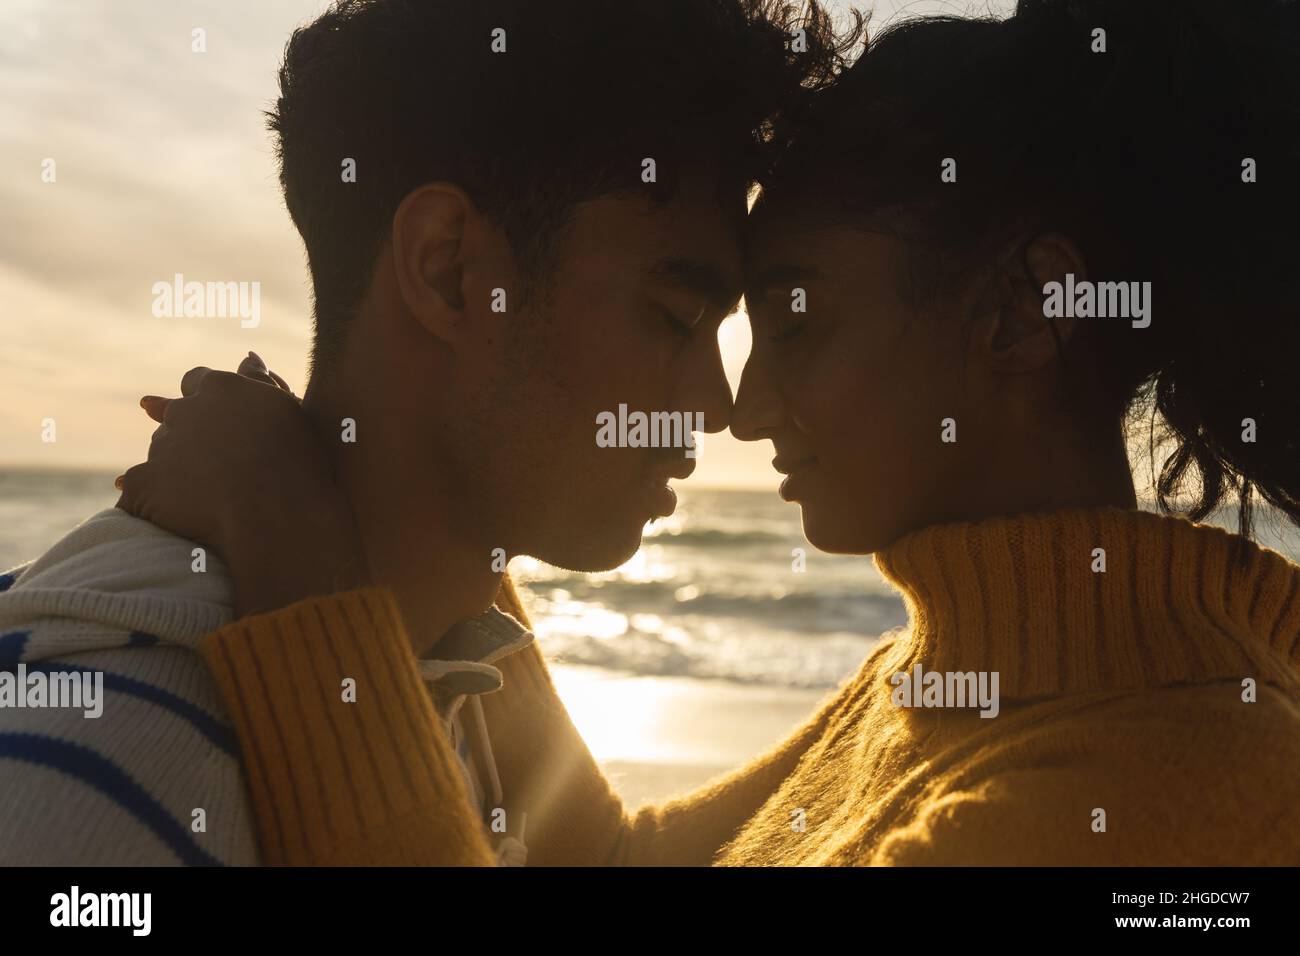 Girlfriend and boyfriend romancing while sitting face to face on beach  stock photo